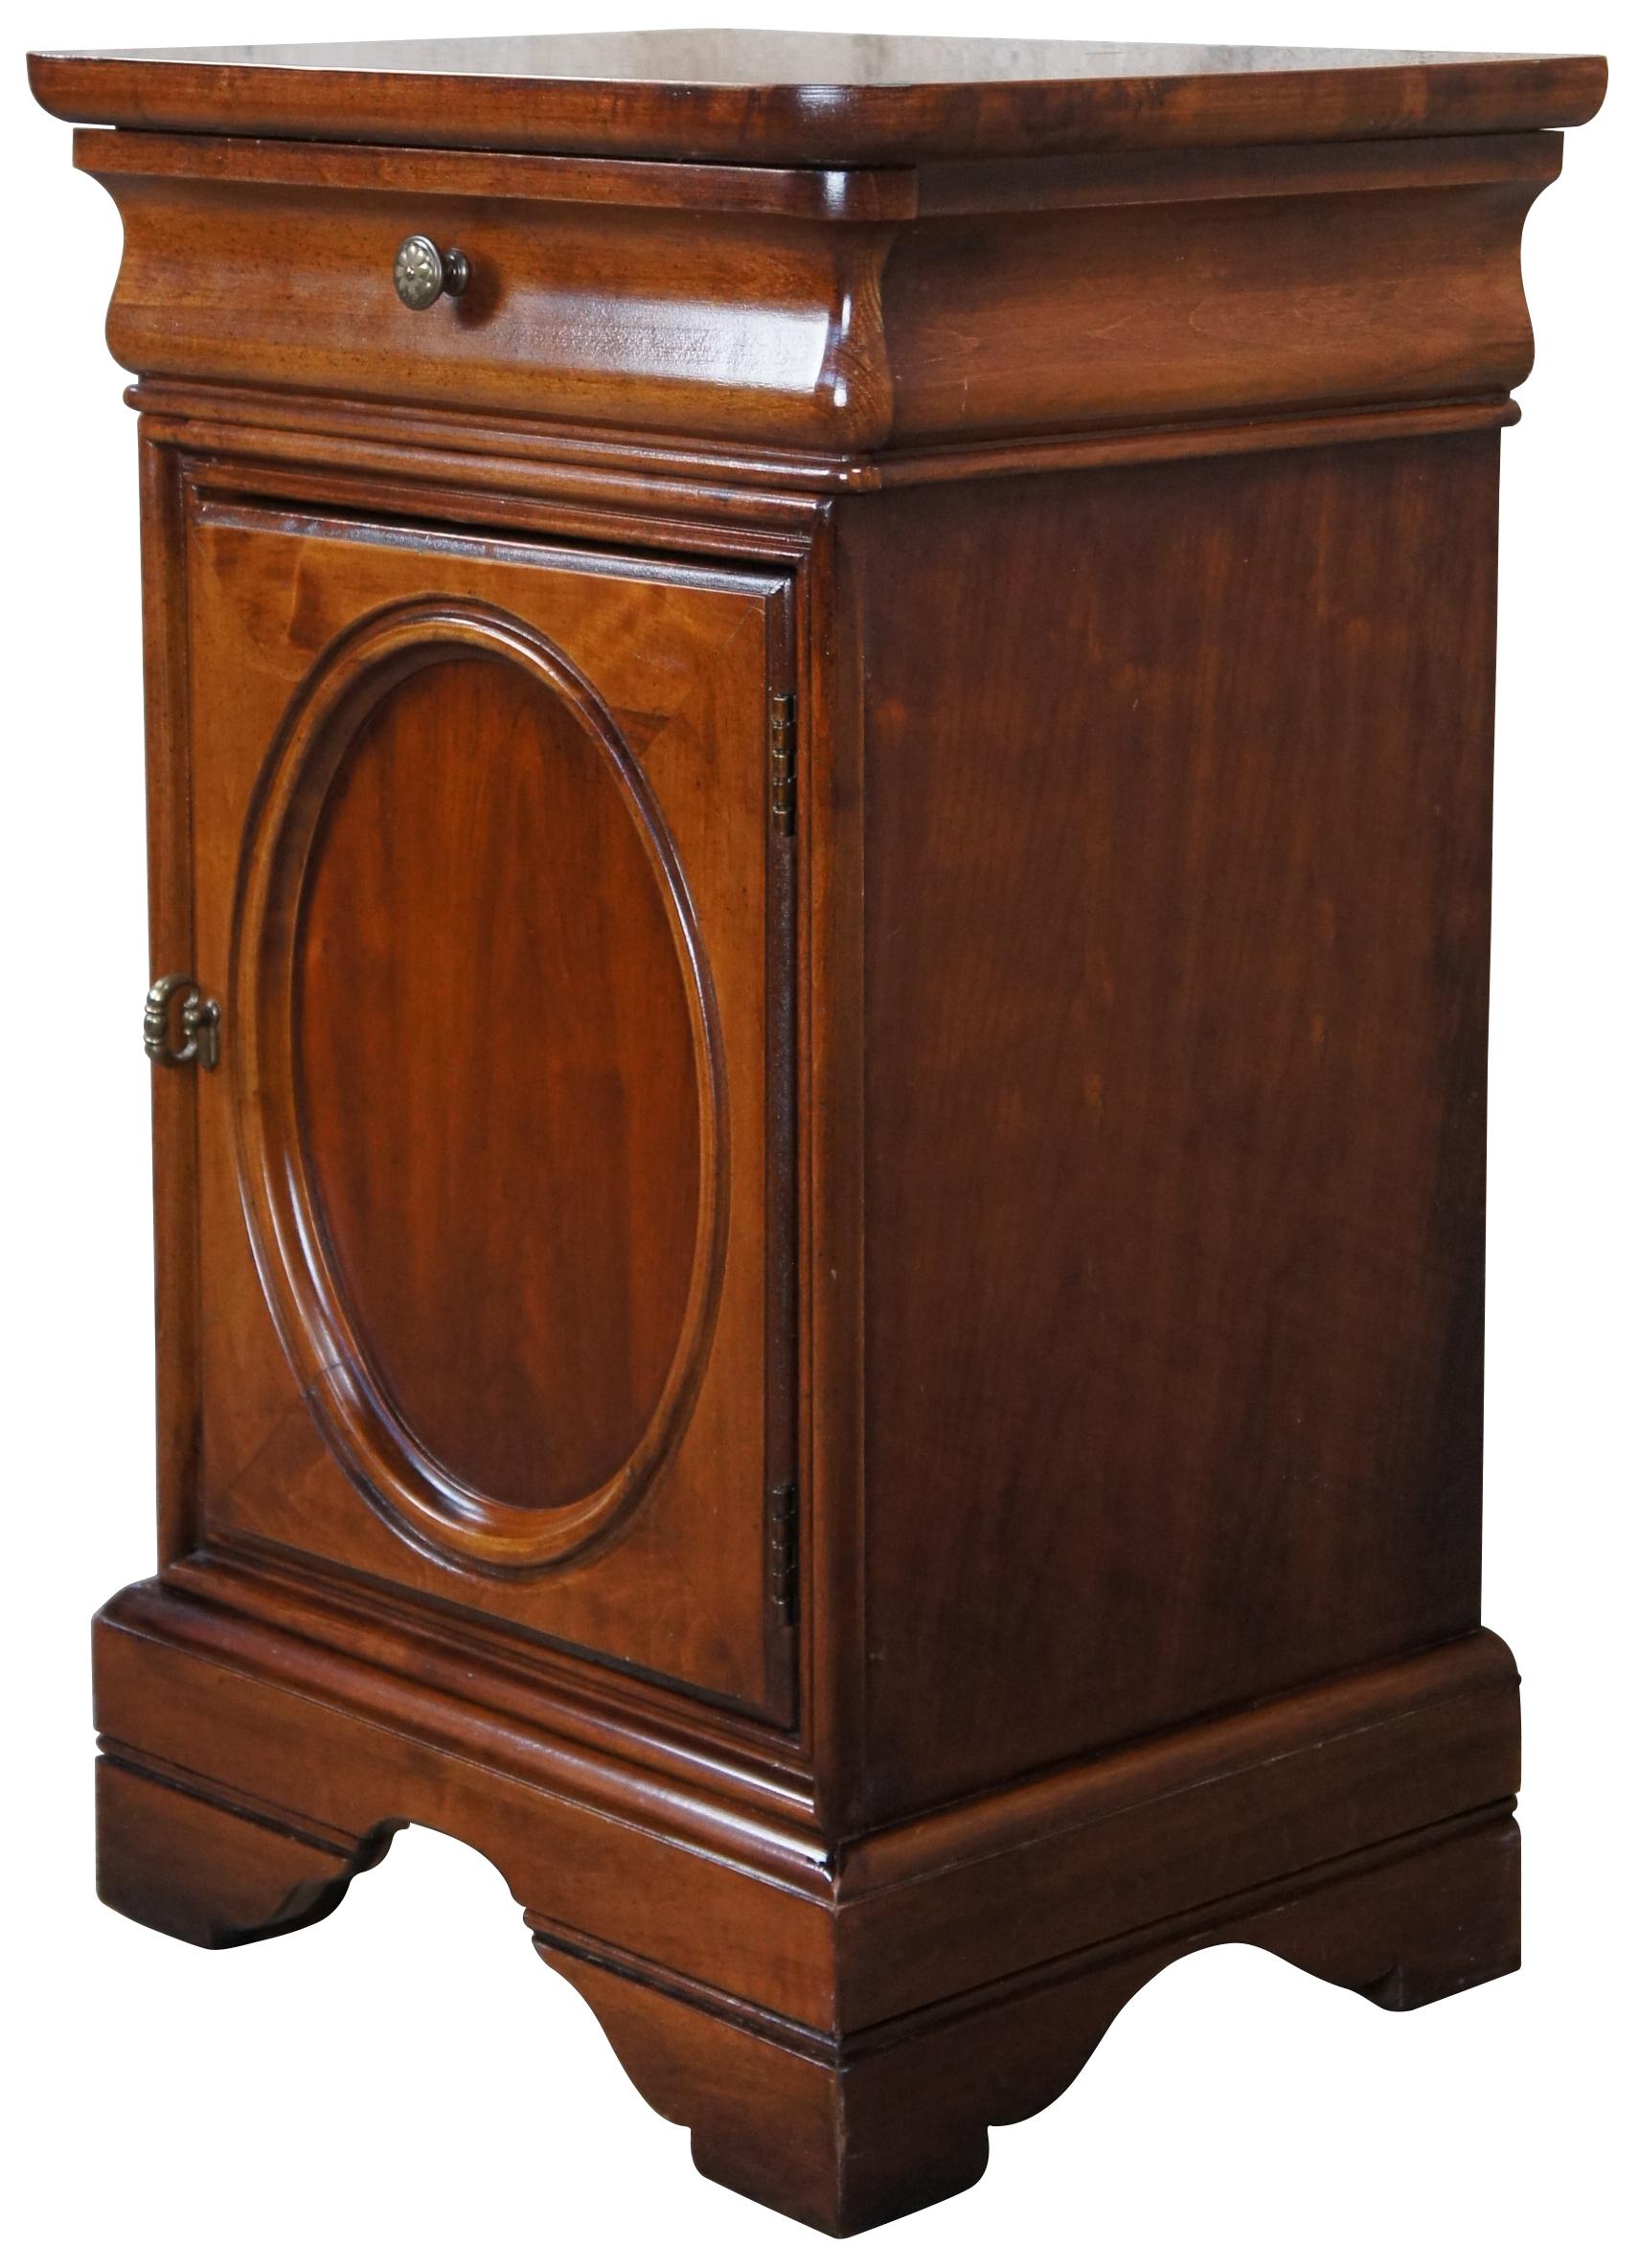 Late 20th Century Louis Phillipe Style Bedside Table or Nightstand.  Made from Cherry with an upper cornice drawer and lower cabinet with shelf.  Marked H 157-623, USA